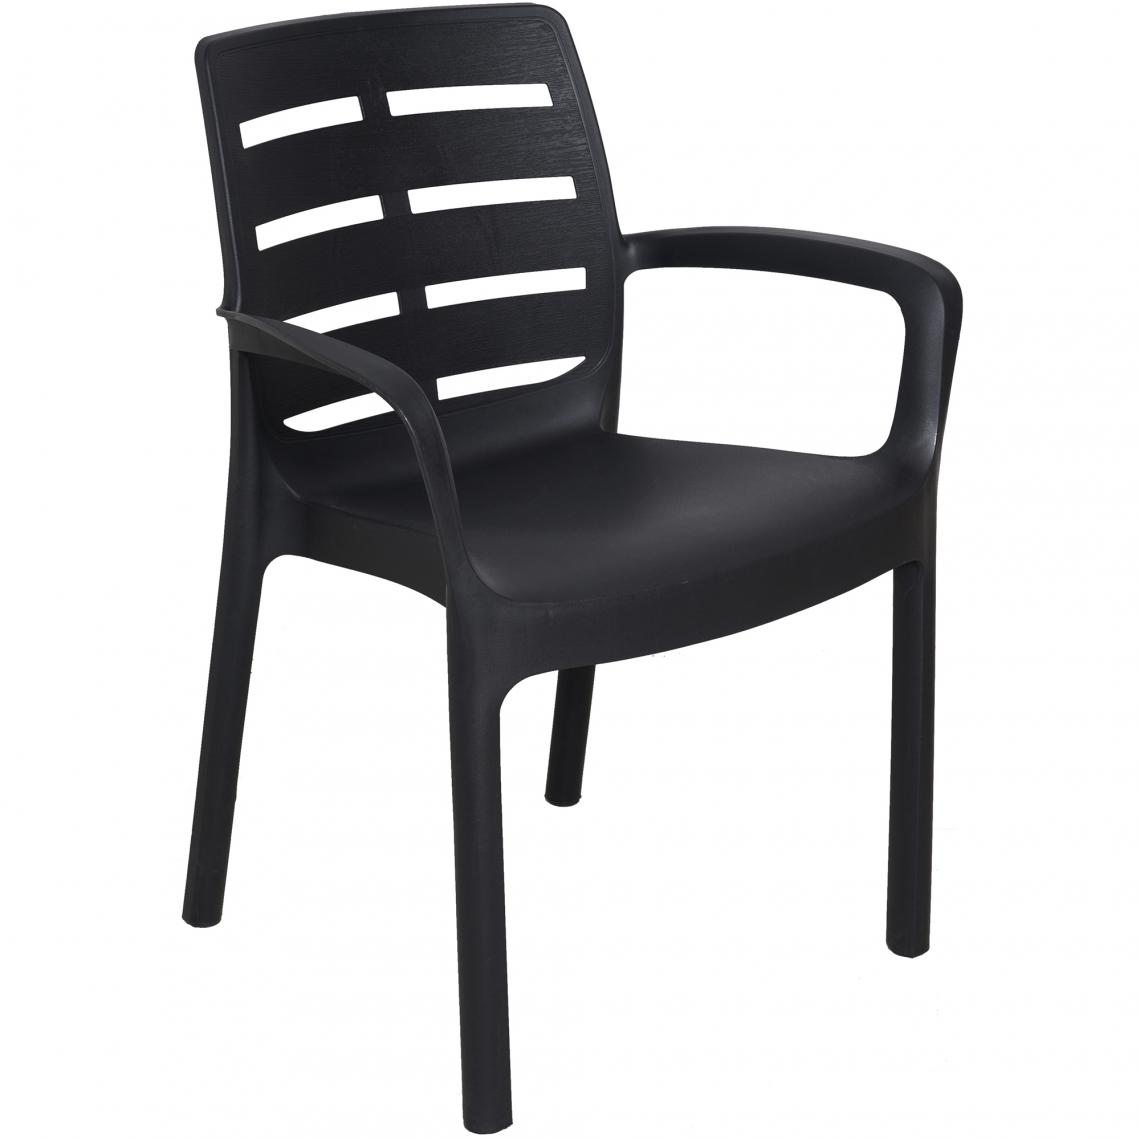 Alter - Fauteuil monobloc empilable, Made in Italy, 61 x 56 x 82 cm, Couleur anthracite - Chaises